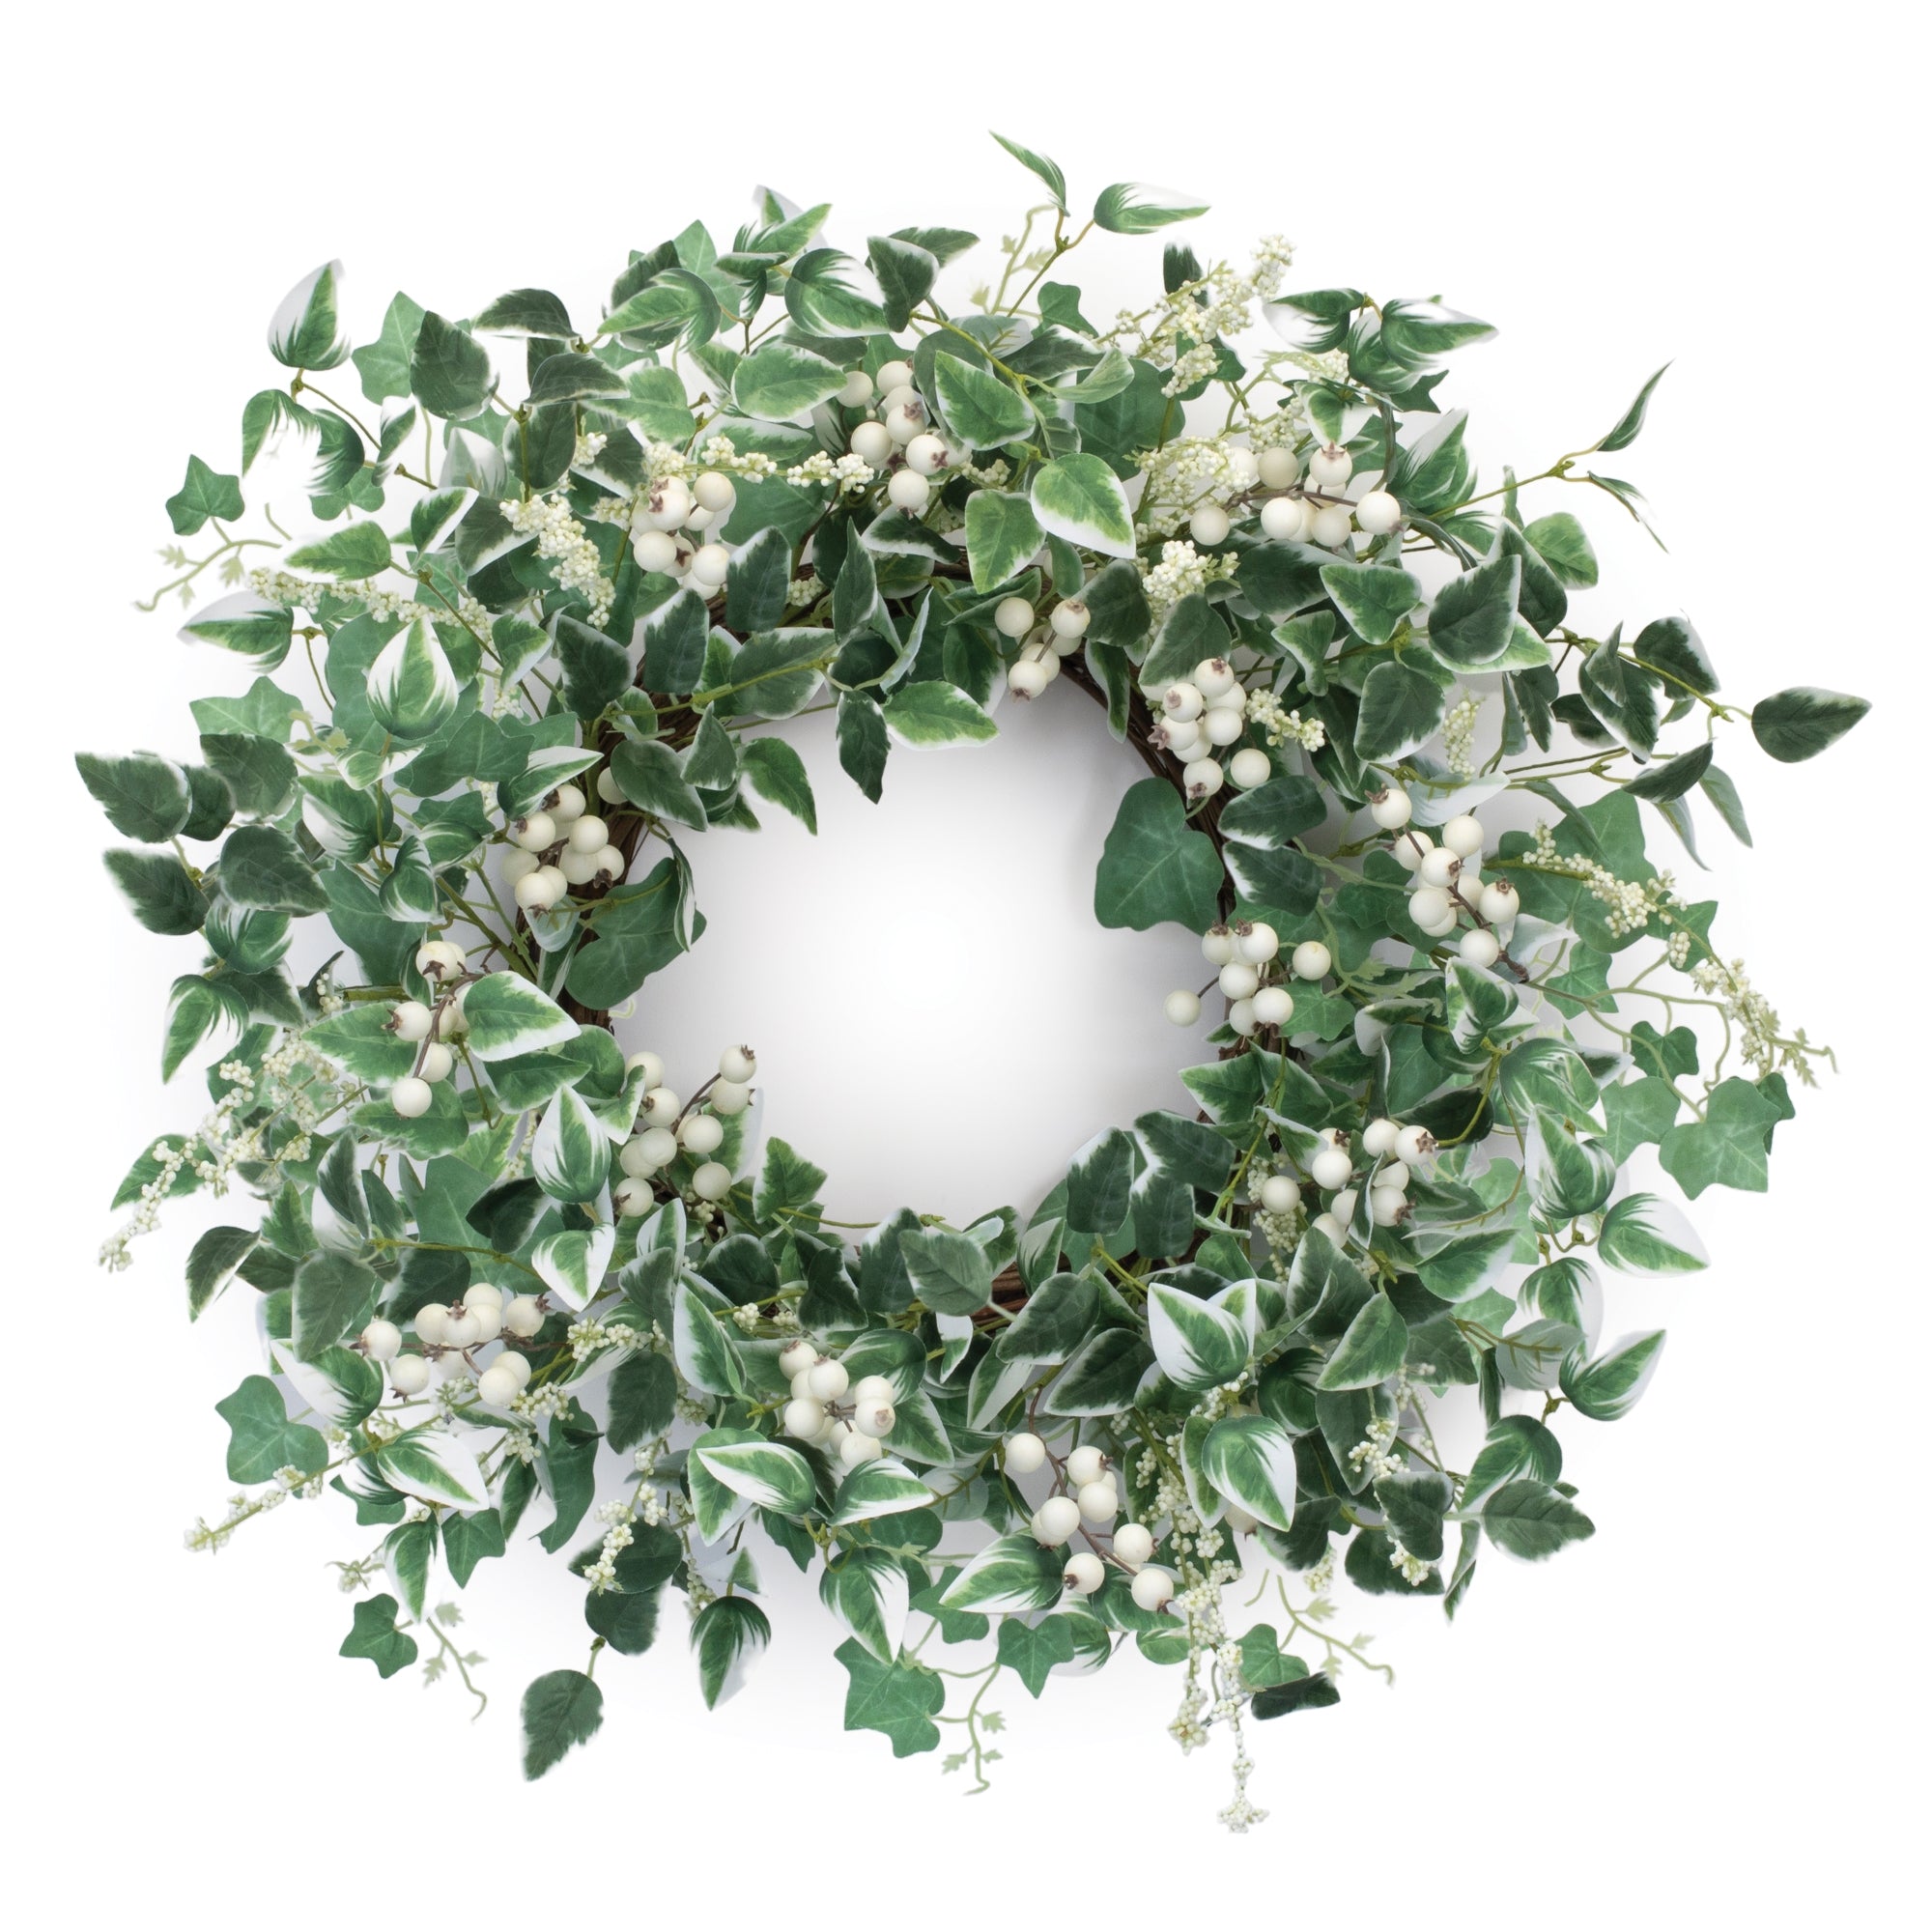 Mixed Foliage and Berry Wreath 23"D